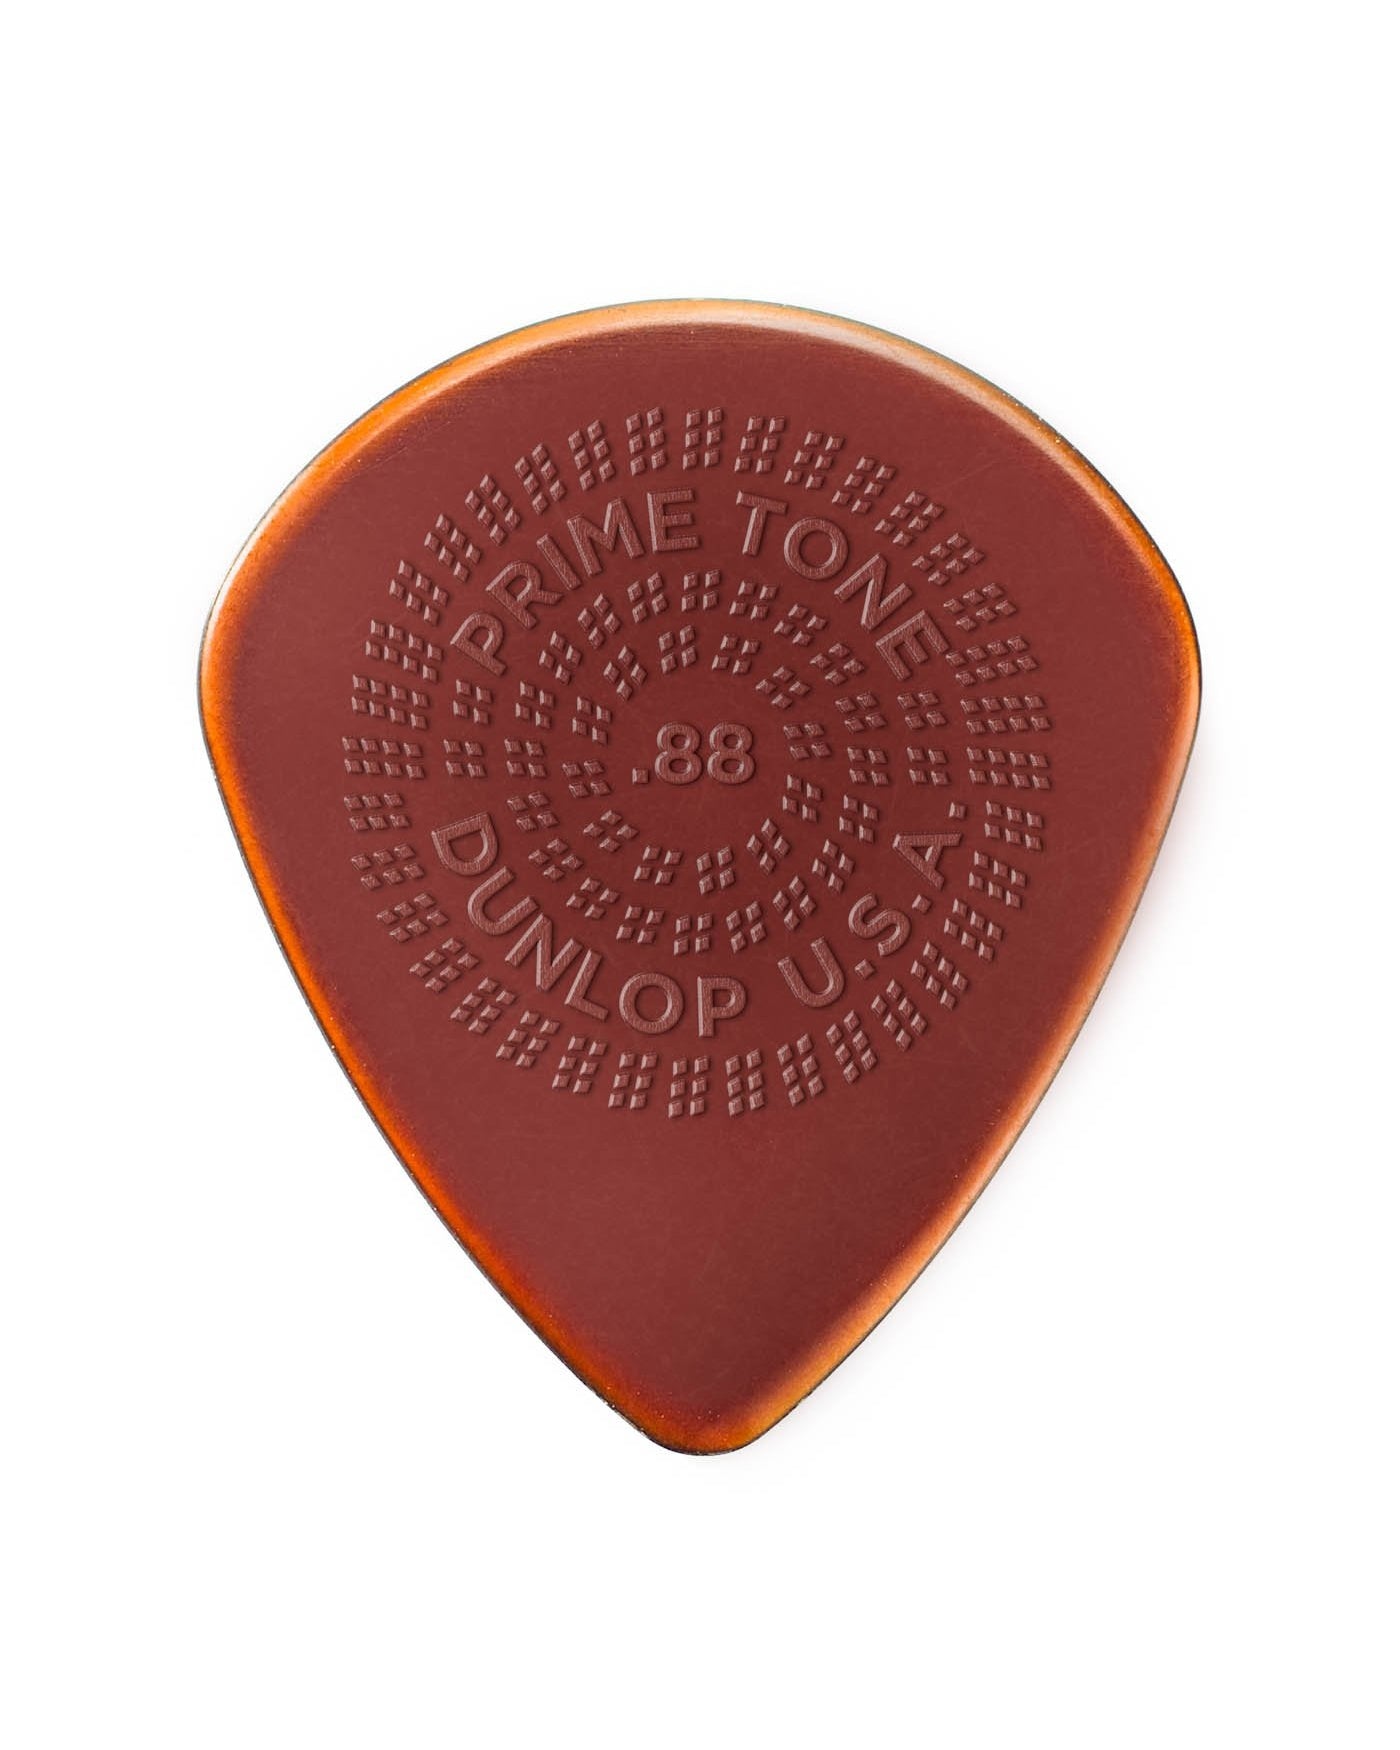 Image 1 of Dunlop Primetone Sculpted Plectra, Primetone Jazz III XL, 0.88MM Thick, Three Pack - SKU# PK520-88 : Product Type Accessories & Parts : Elderly Instruments